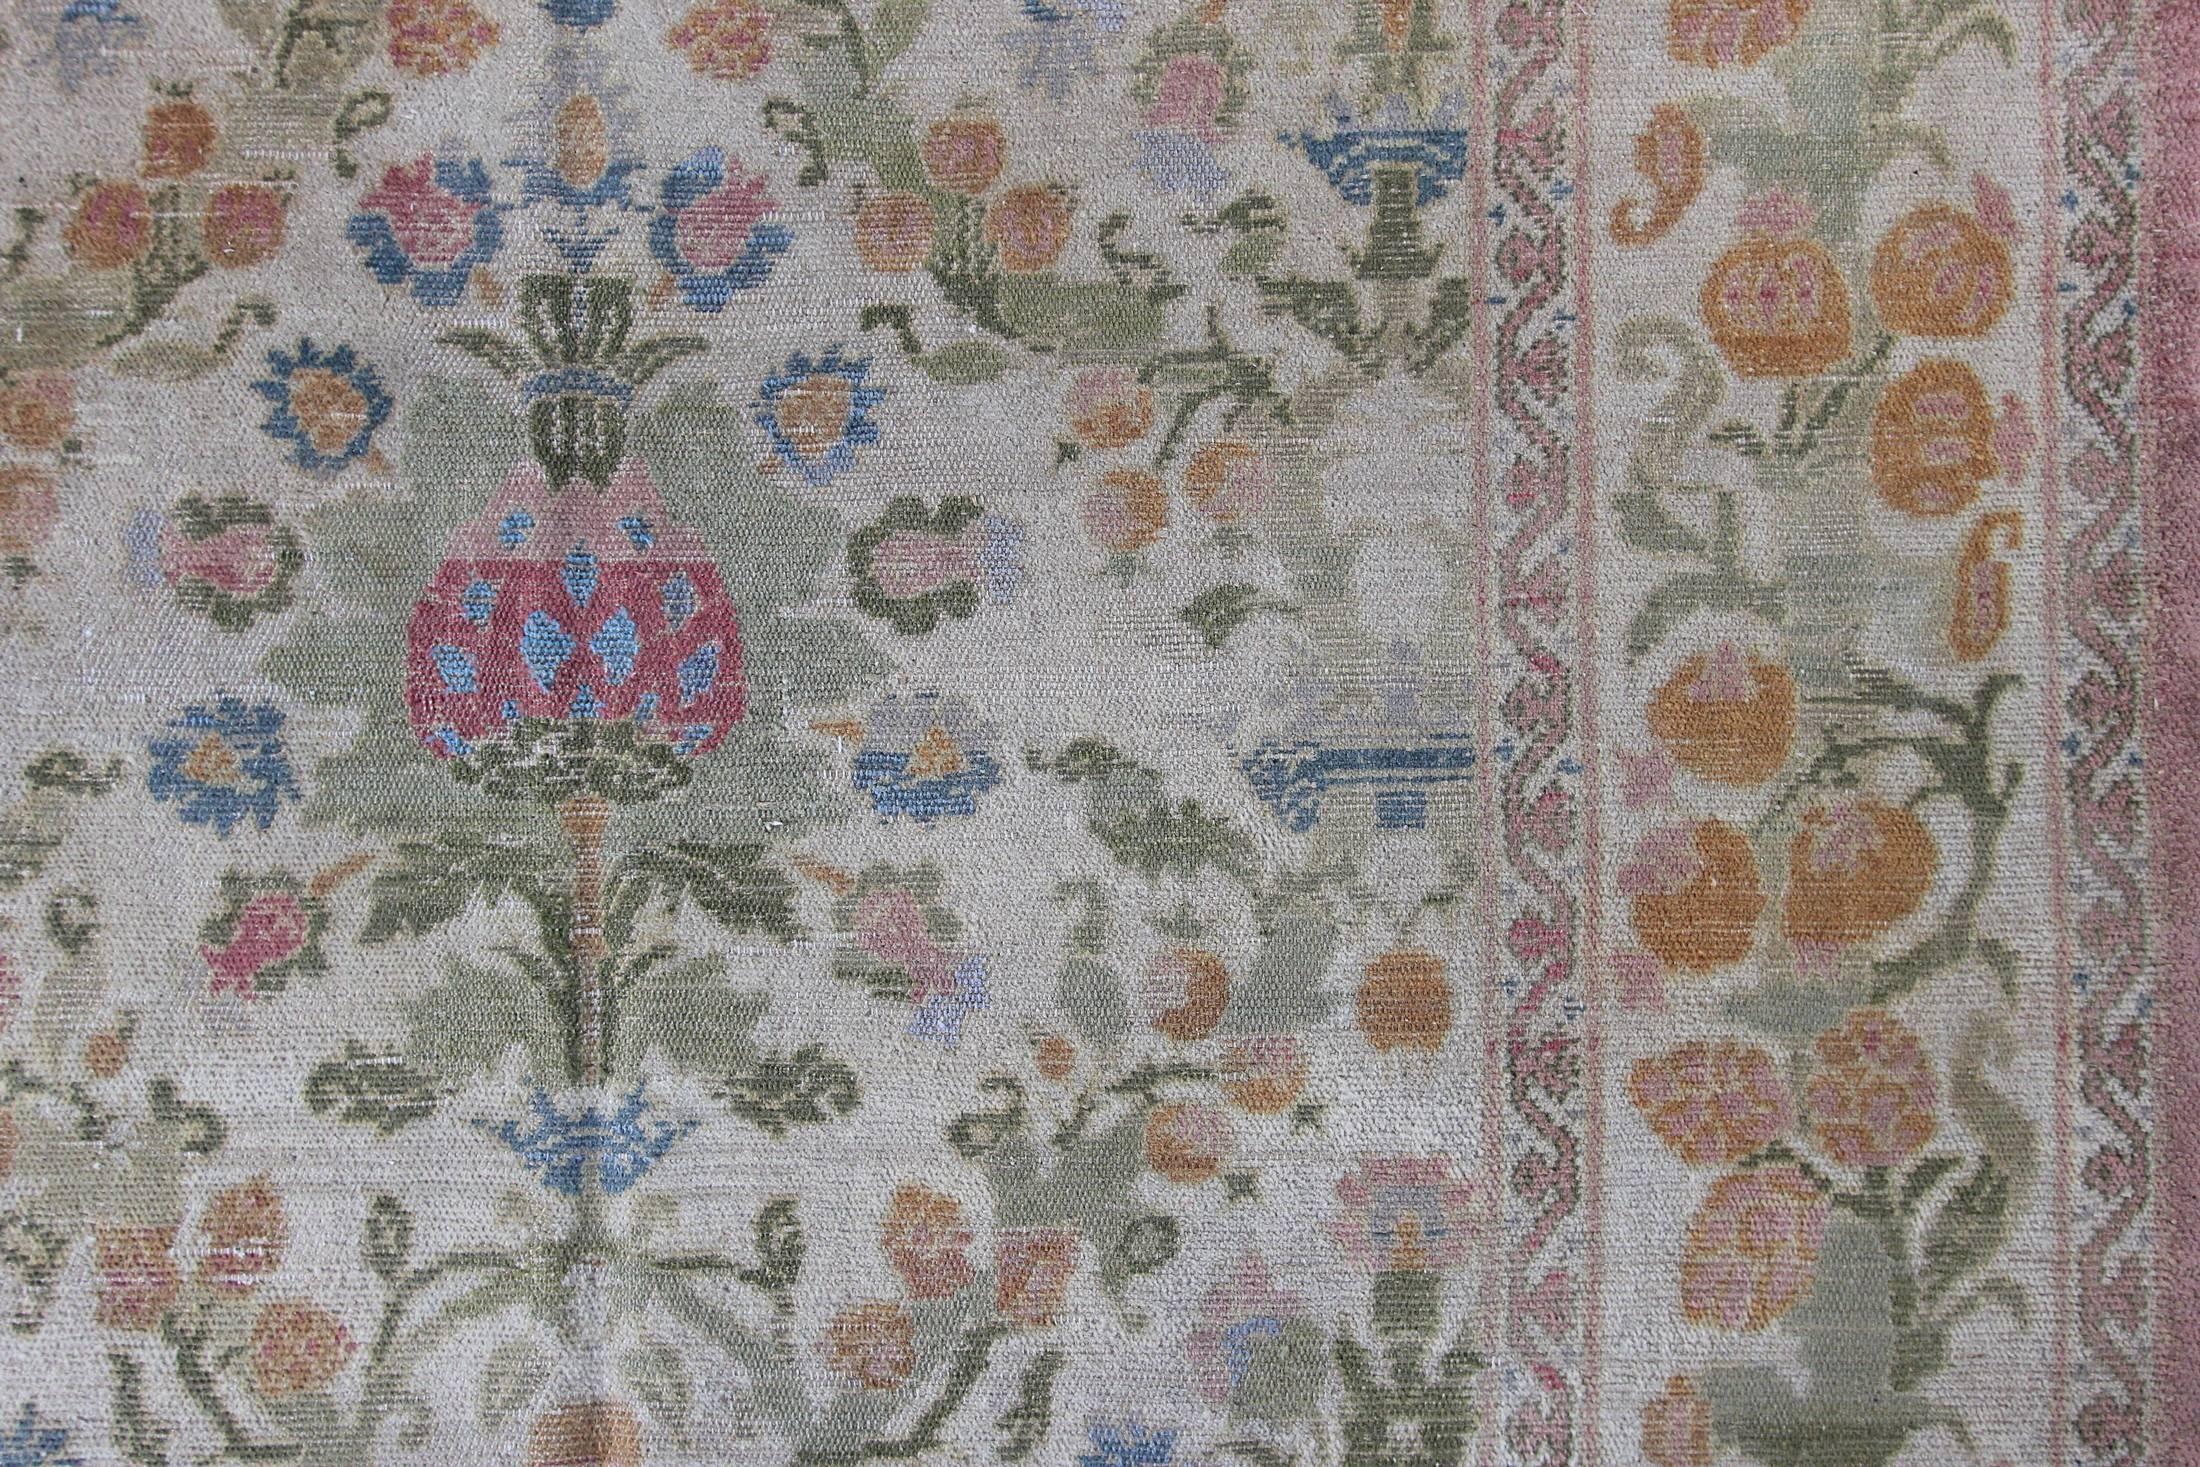 Spanish Cuenca carpets have always been very soft in their palette and rather than piled they are knotted in staggered stages. With both Persian and European styles they are beautiful decorative carpets. This carpet has delicate vases surrounded by